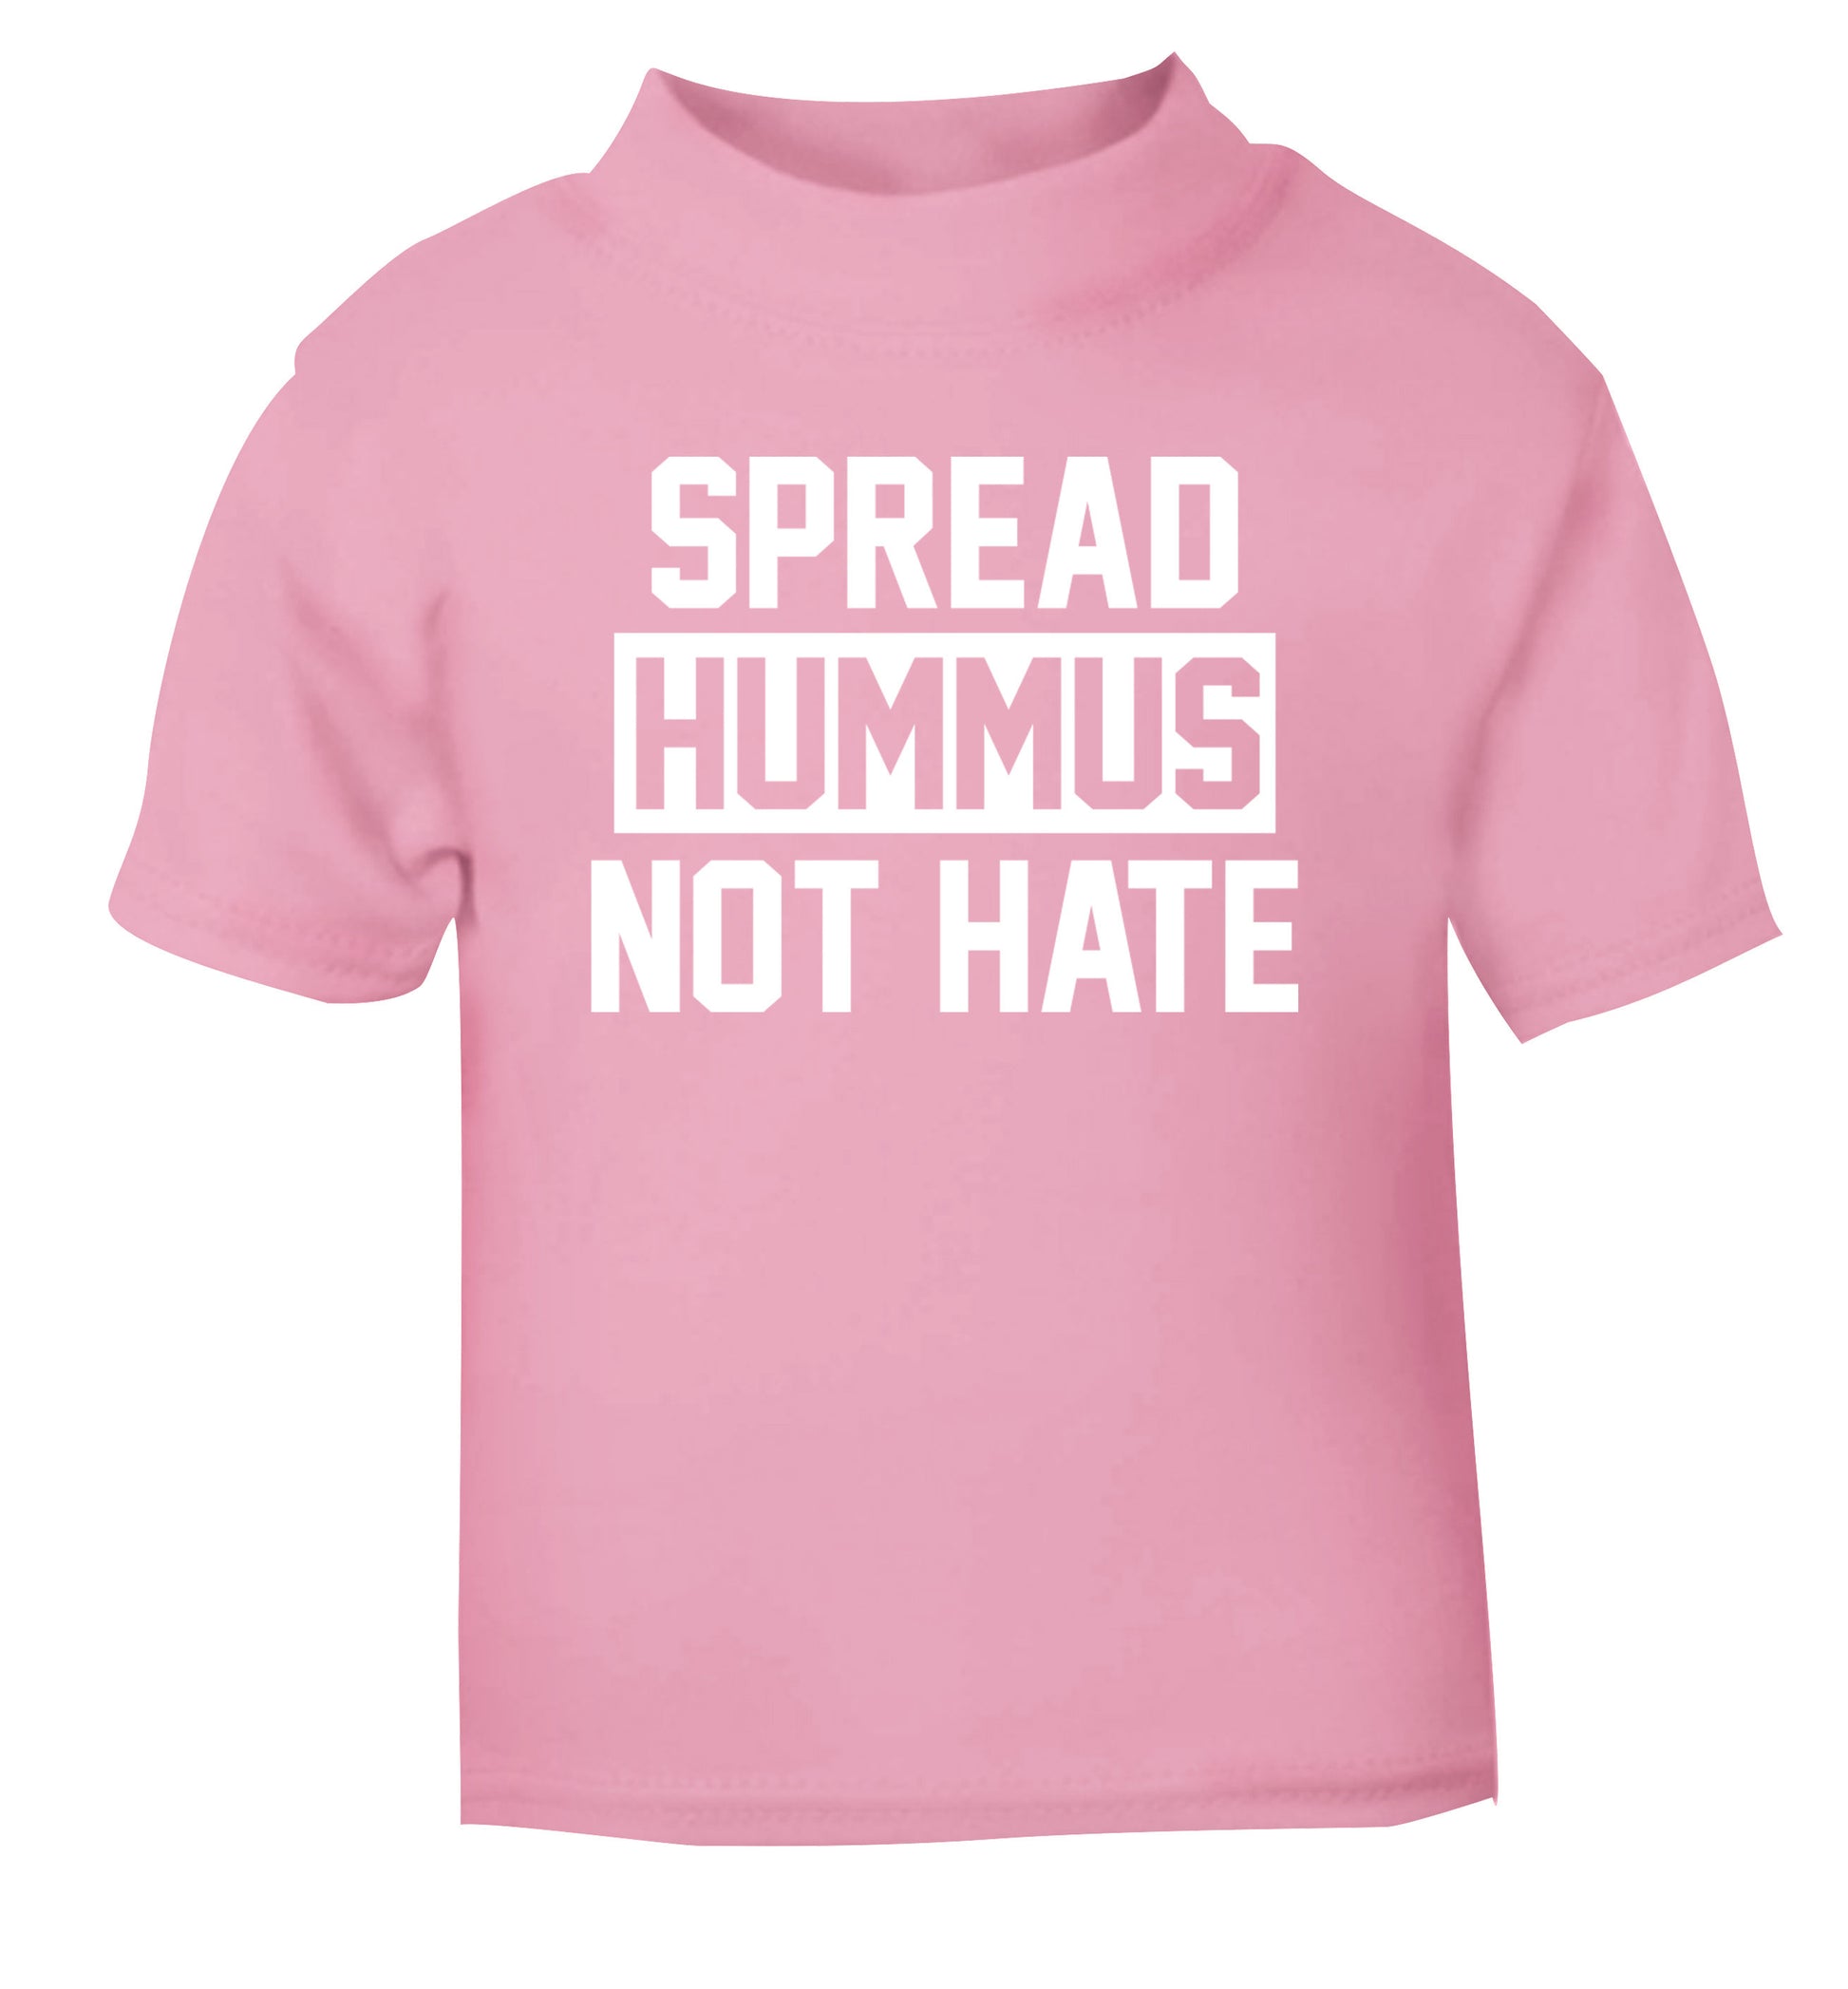 Spread hummus not hate light pink Baby Toddler Tshirt 2 Years